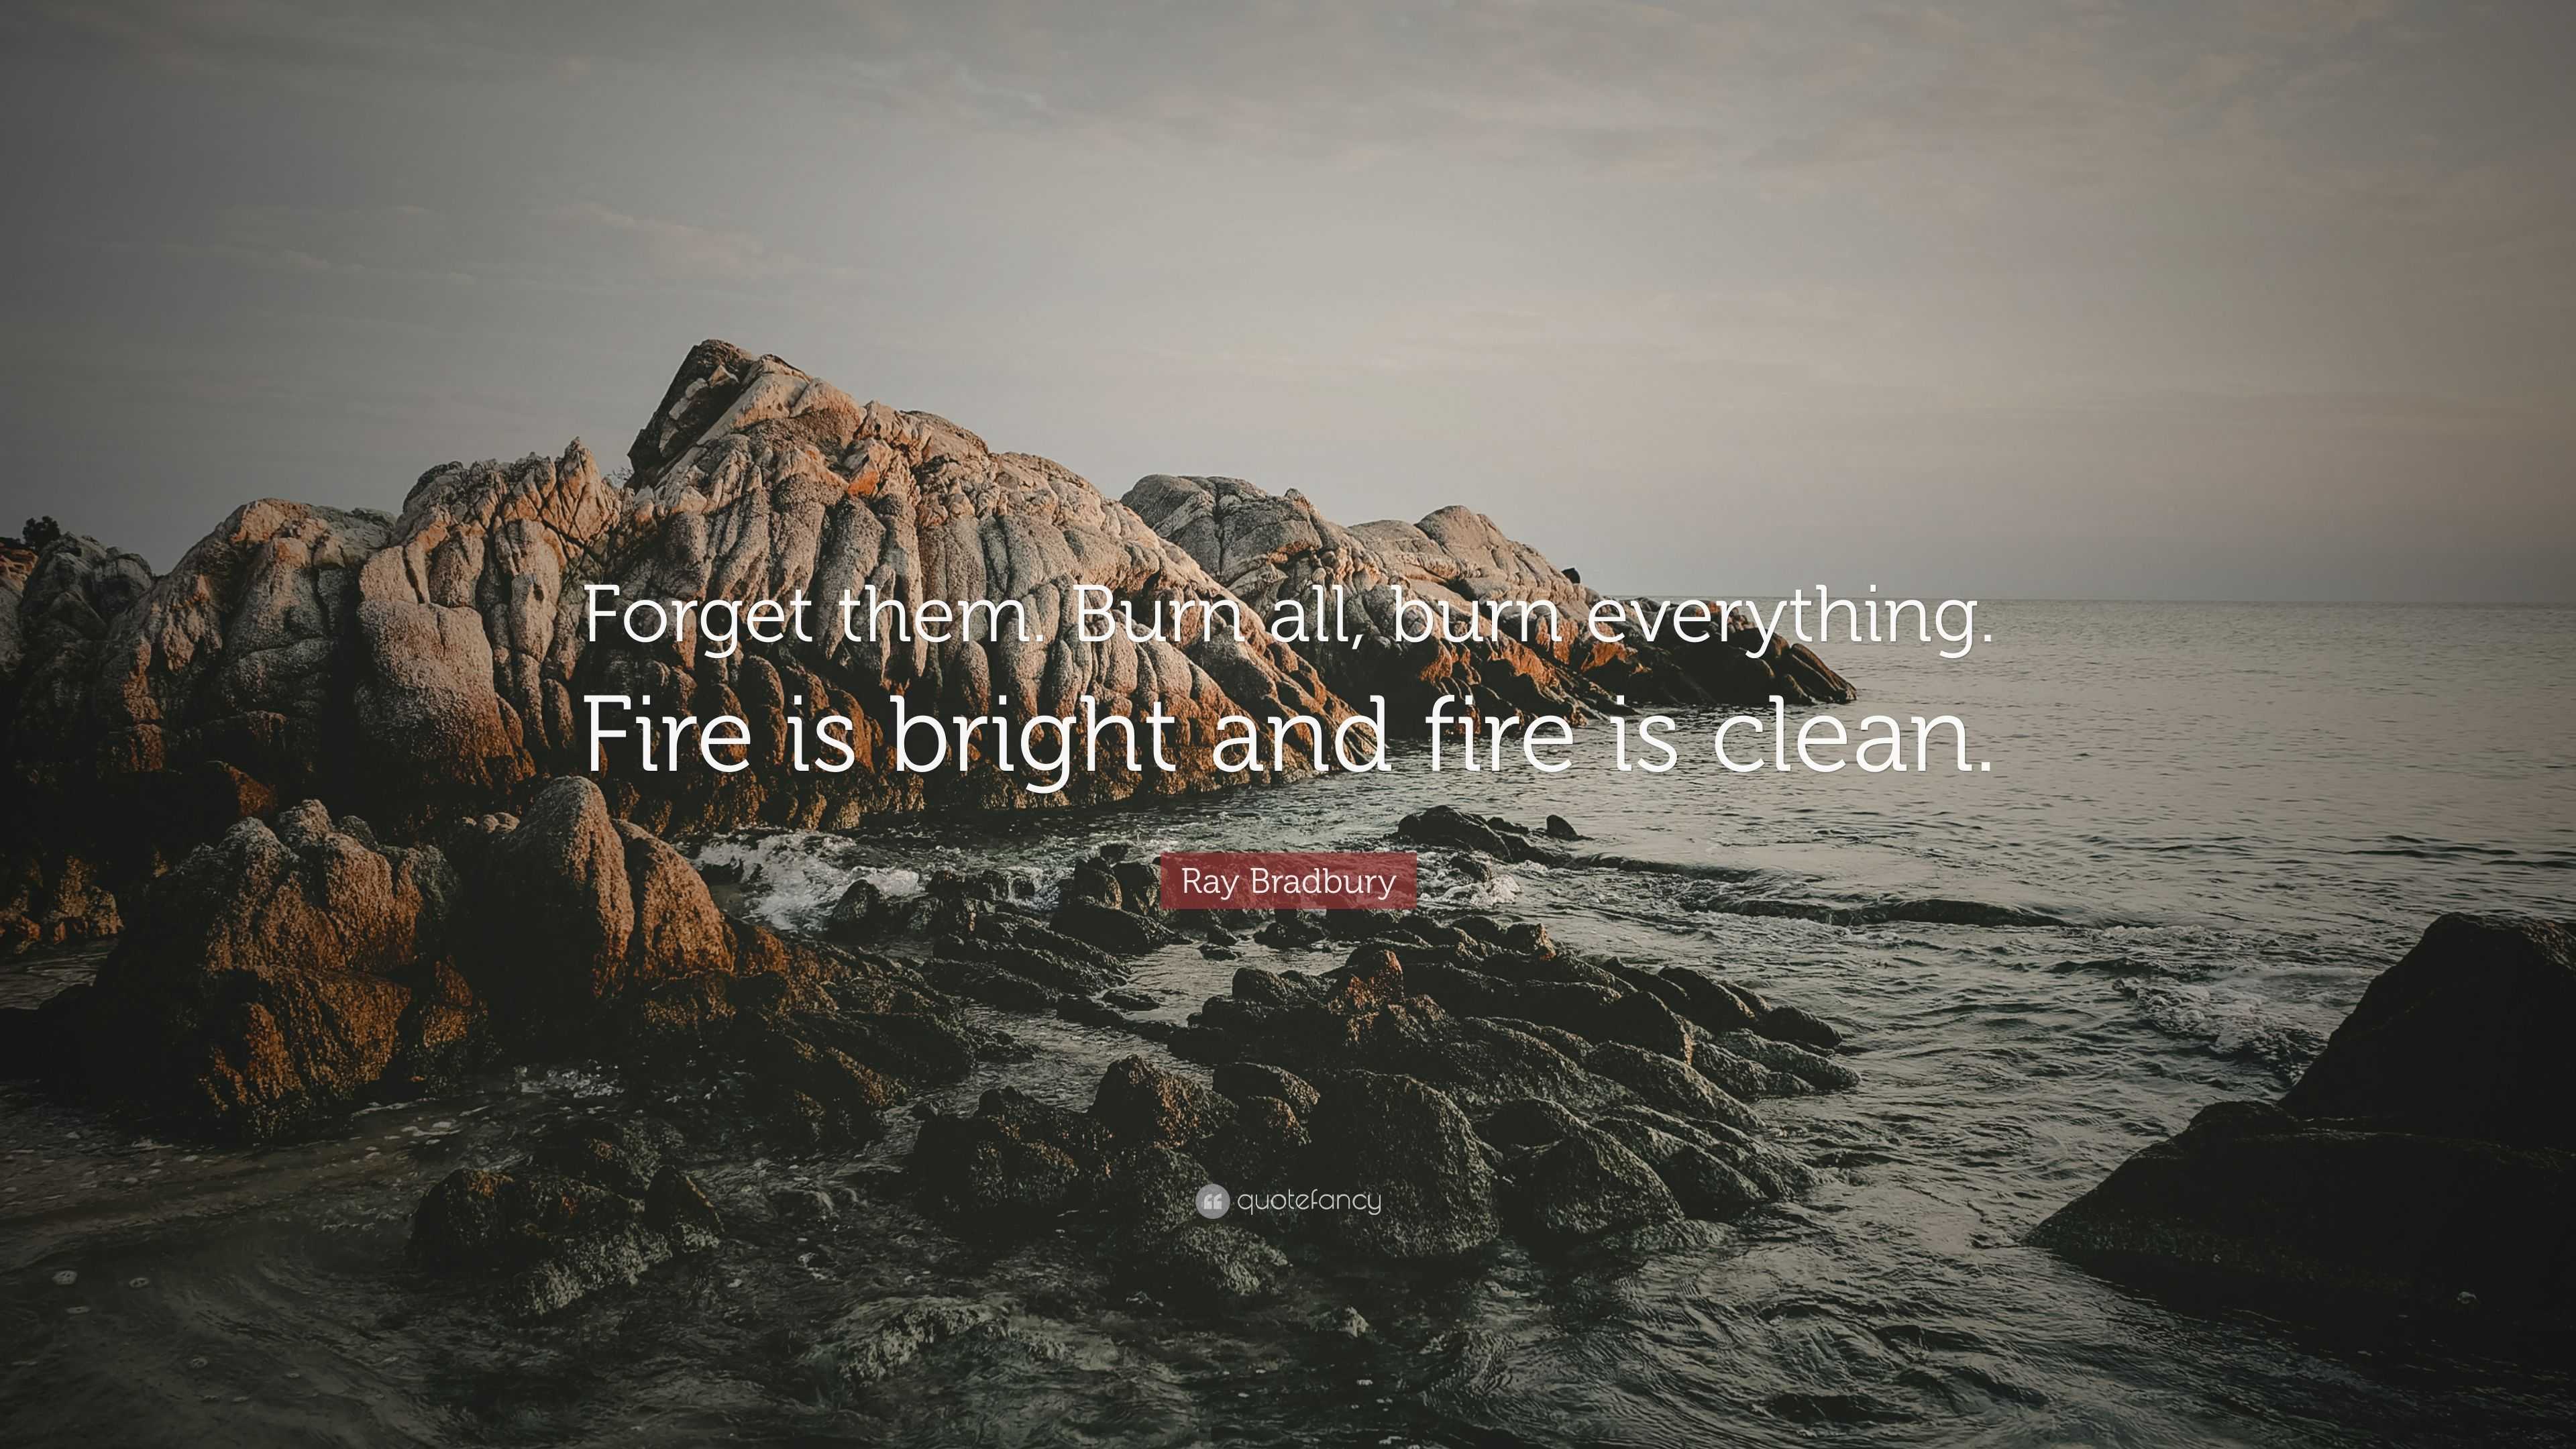 Ray Bradbury Quote: “Forget them. Burn all, burn everything. Fire is ...